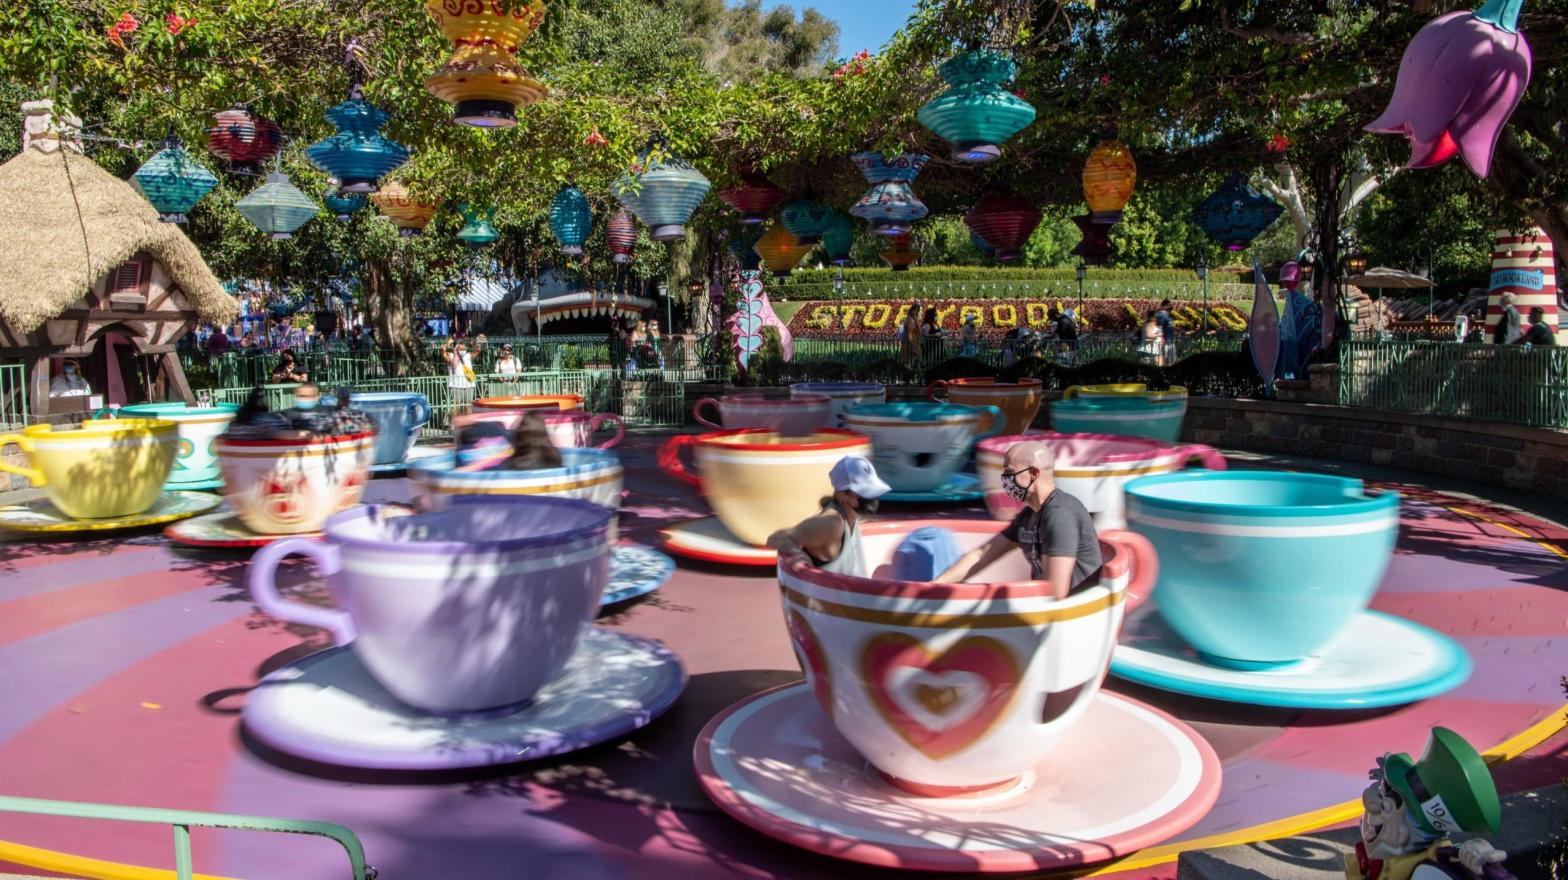 Guests ride the Mad Tea Party teacups at the Disneyland Resort on April 30, 2021 in Anaheim, California.  (Photo: Richard Harbaugh/Disneyland Resort, Getty Images)